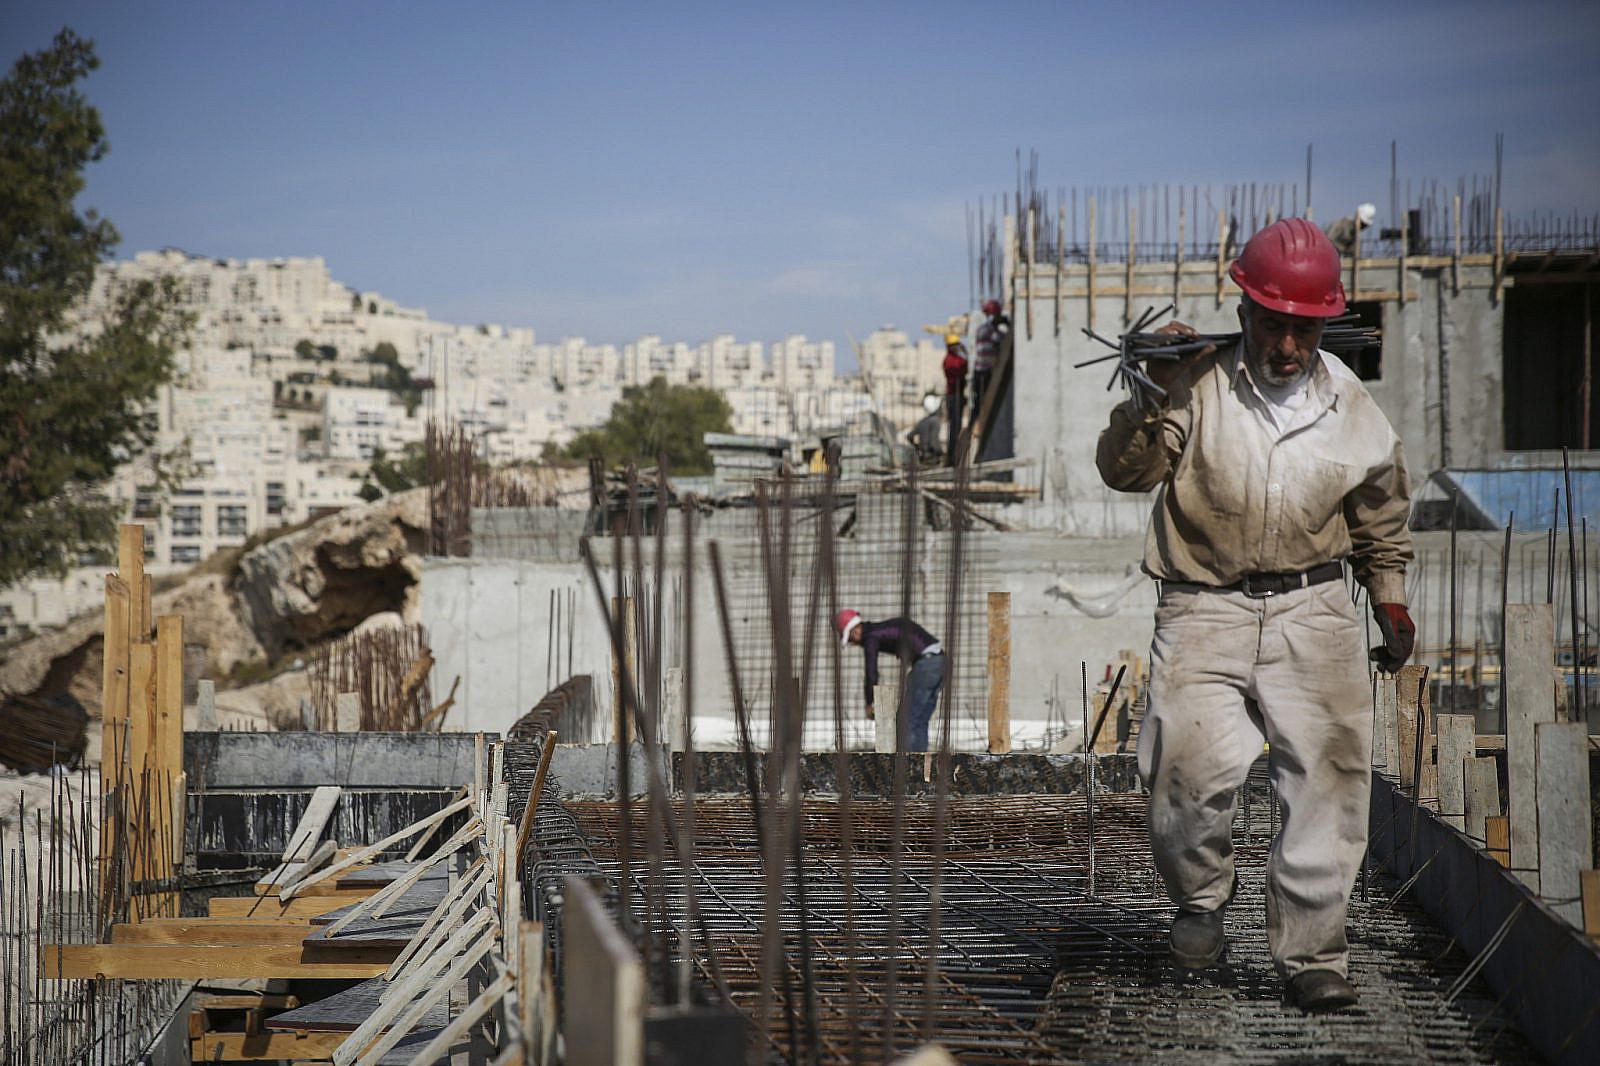 Palestinian workers during construction work on new apartment buildings in the Jewish neighborhood of Har Homa, East Jerusalem. October 28, 2014. (Hadas Parush/Flash90)